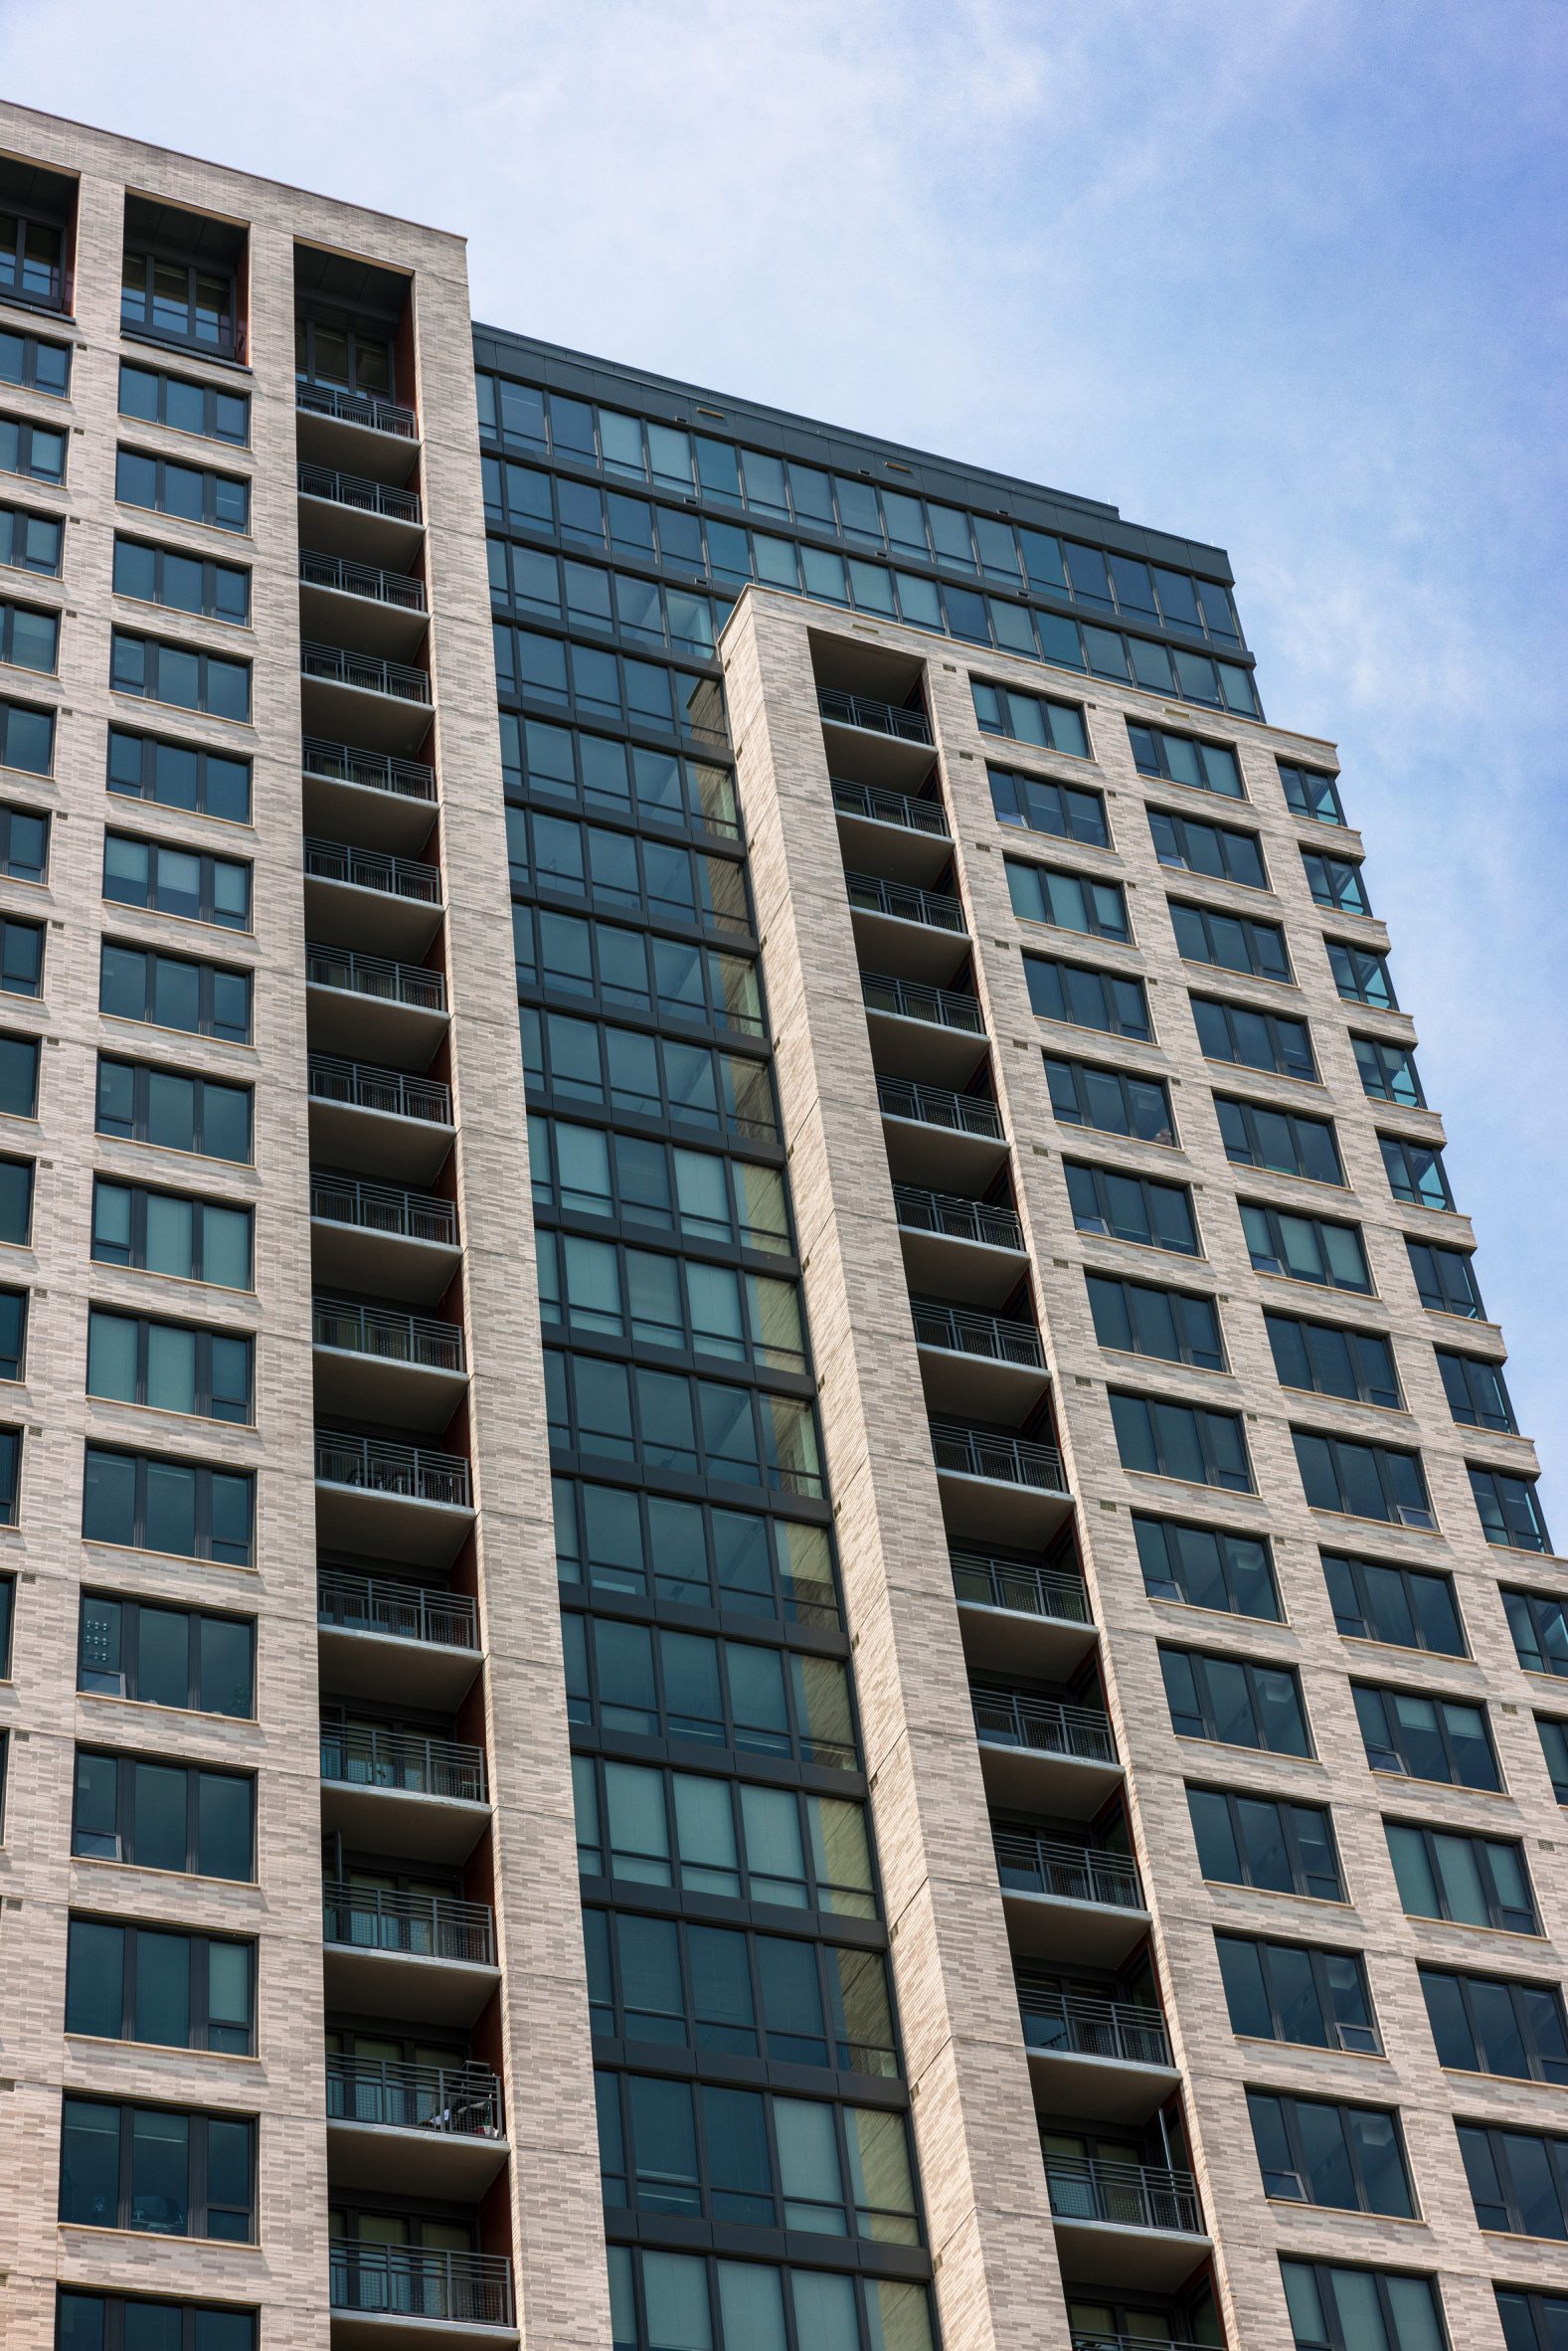 27-storey mixed-use tower in Silver Spring, Maryland